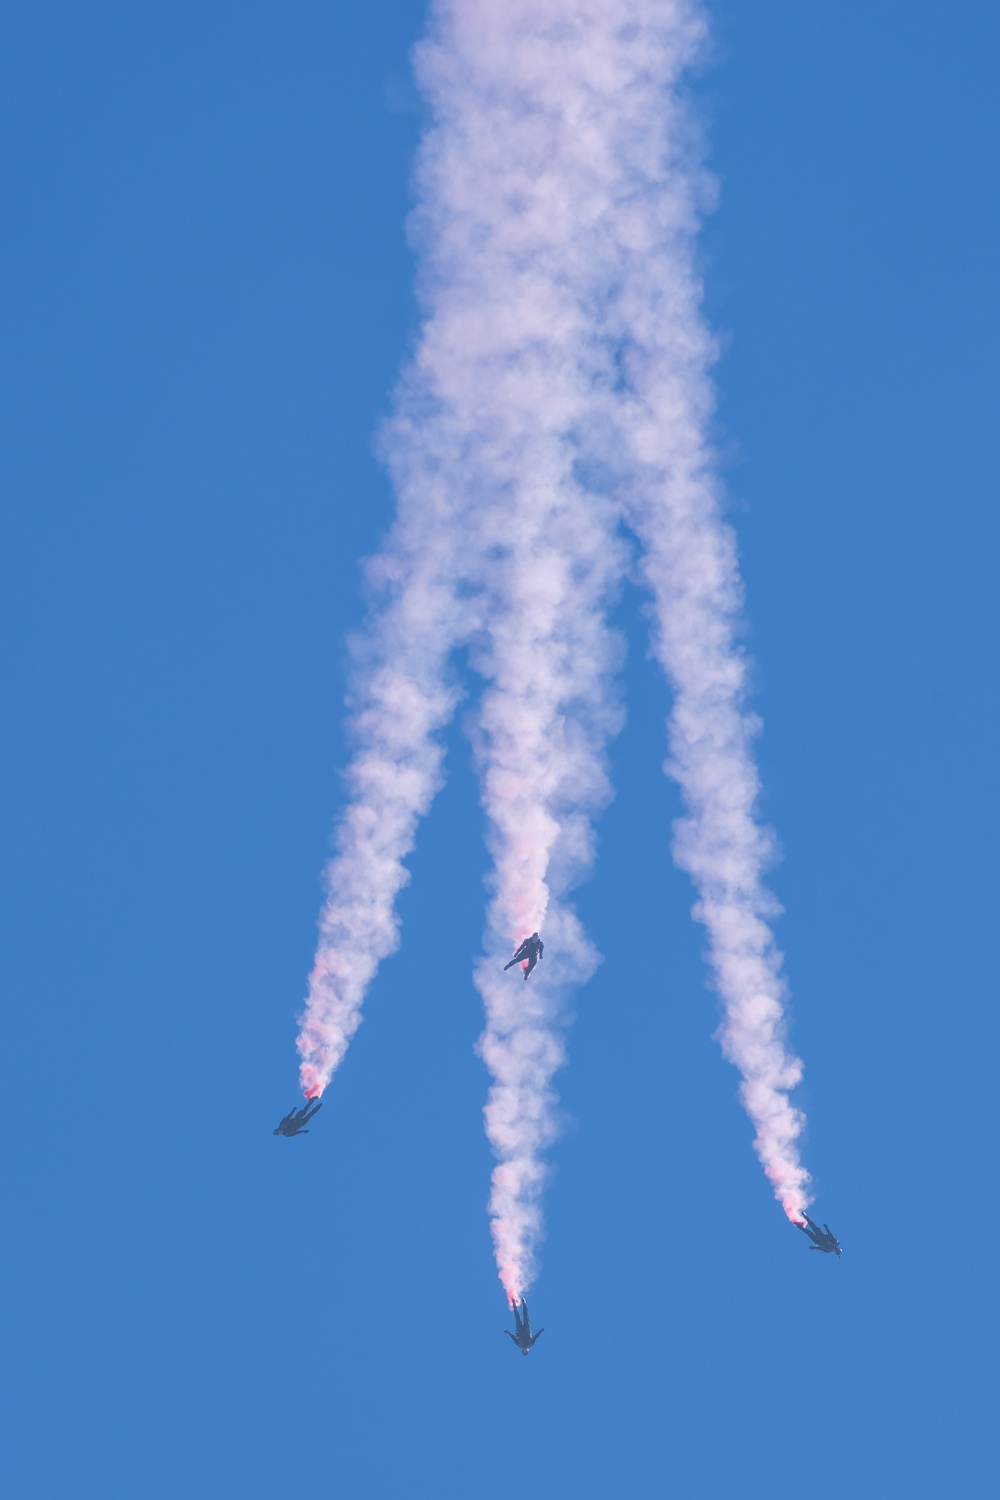 The U.S. Army Parachute Team in free fall at Pacific Airshow